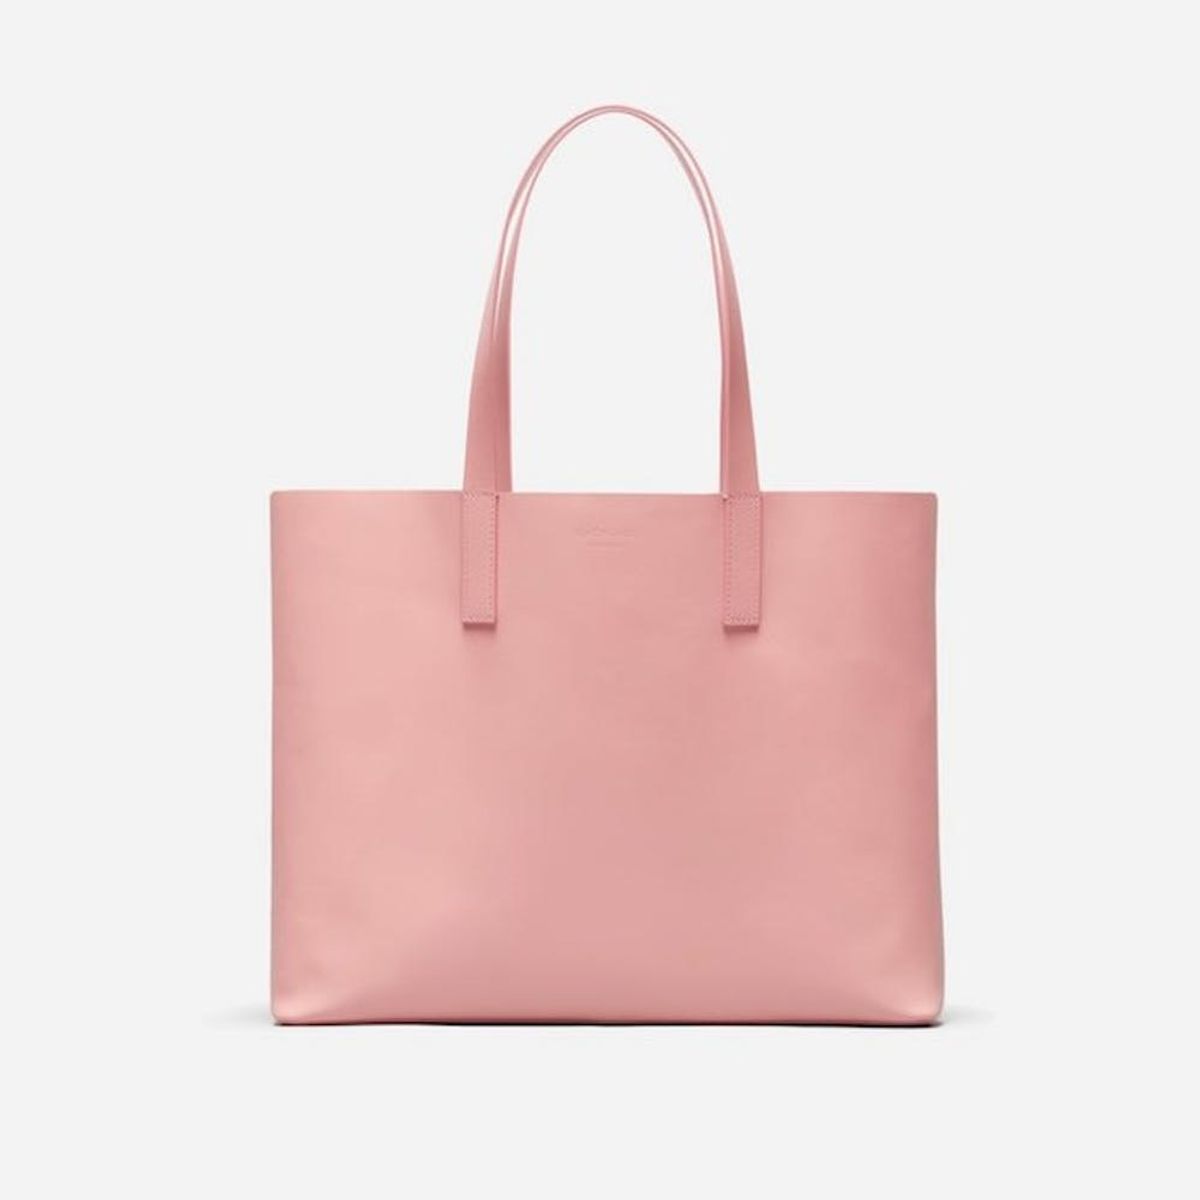 12 Stylish Tote Bags That Commuters Will Love